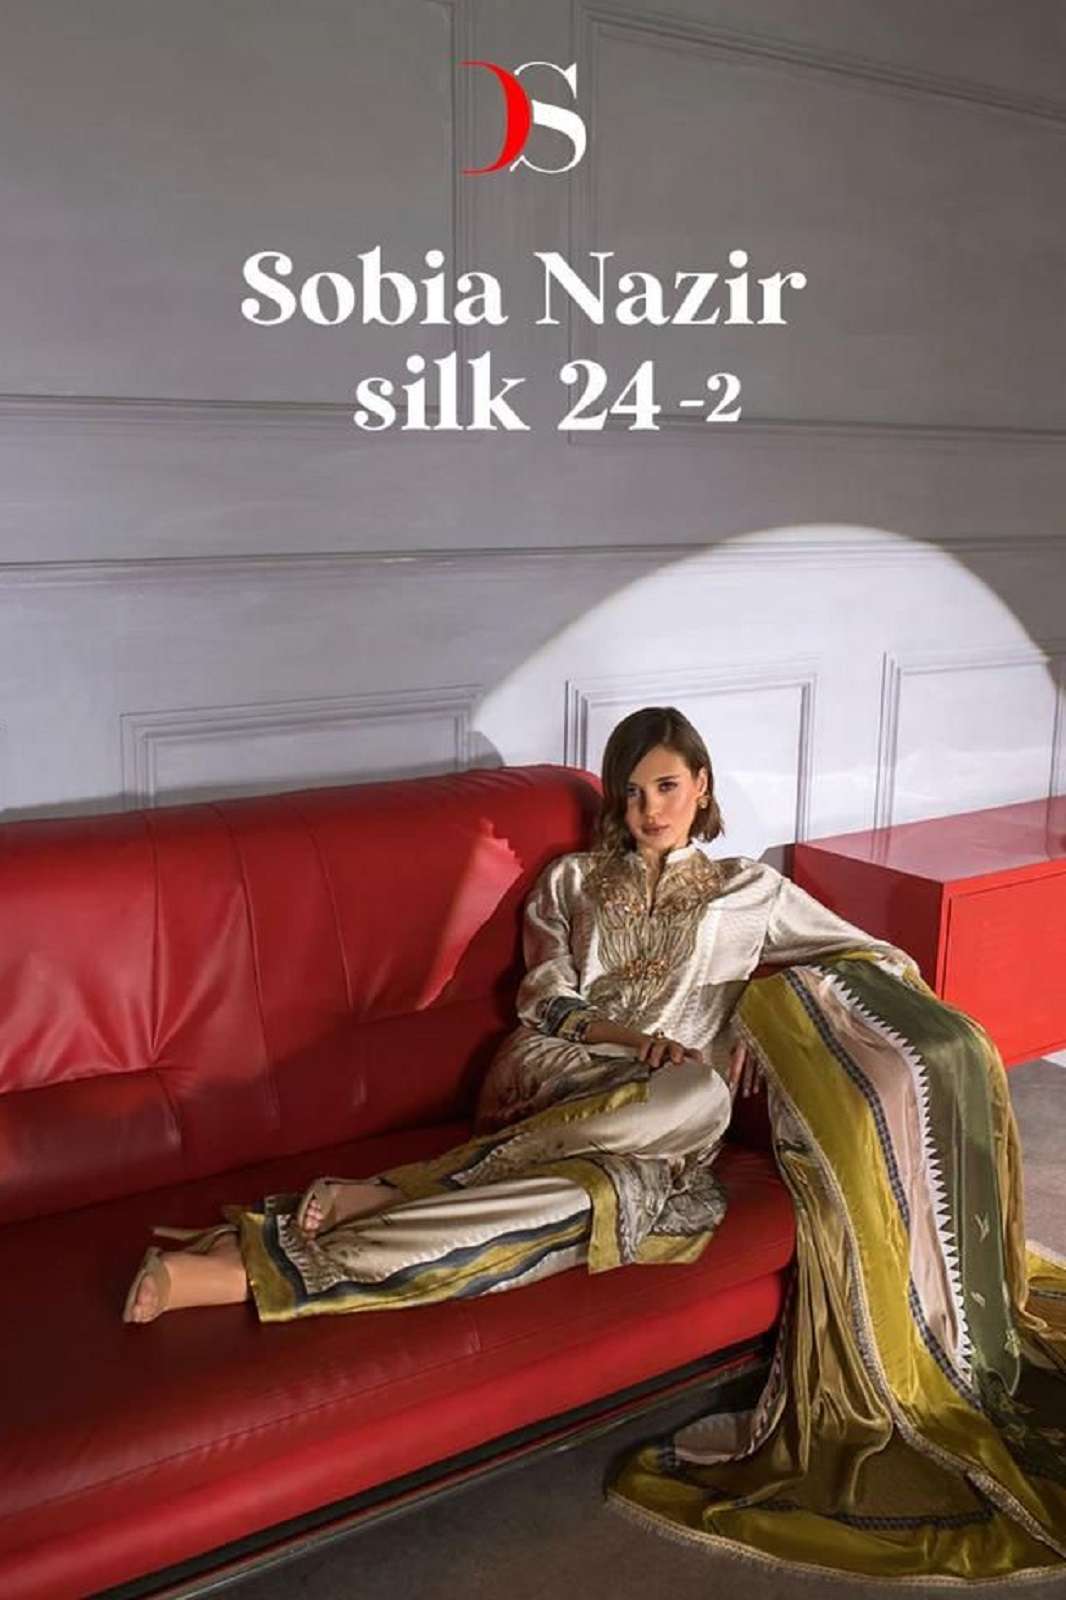 DEEPSY SUITS SOBIA NAZIR SILK 24 2 PAKISTANI COLLECTION